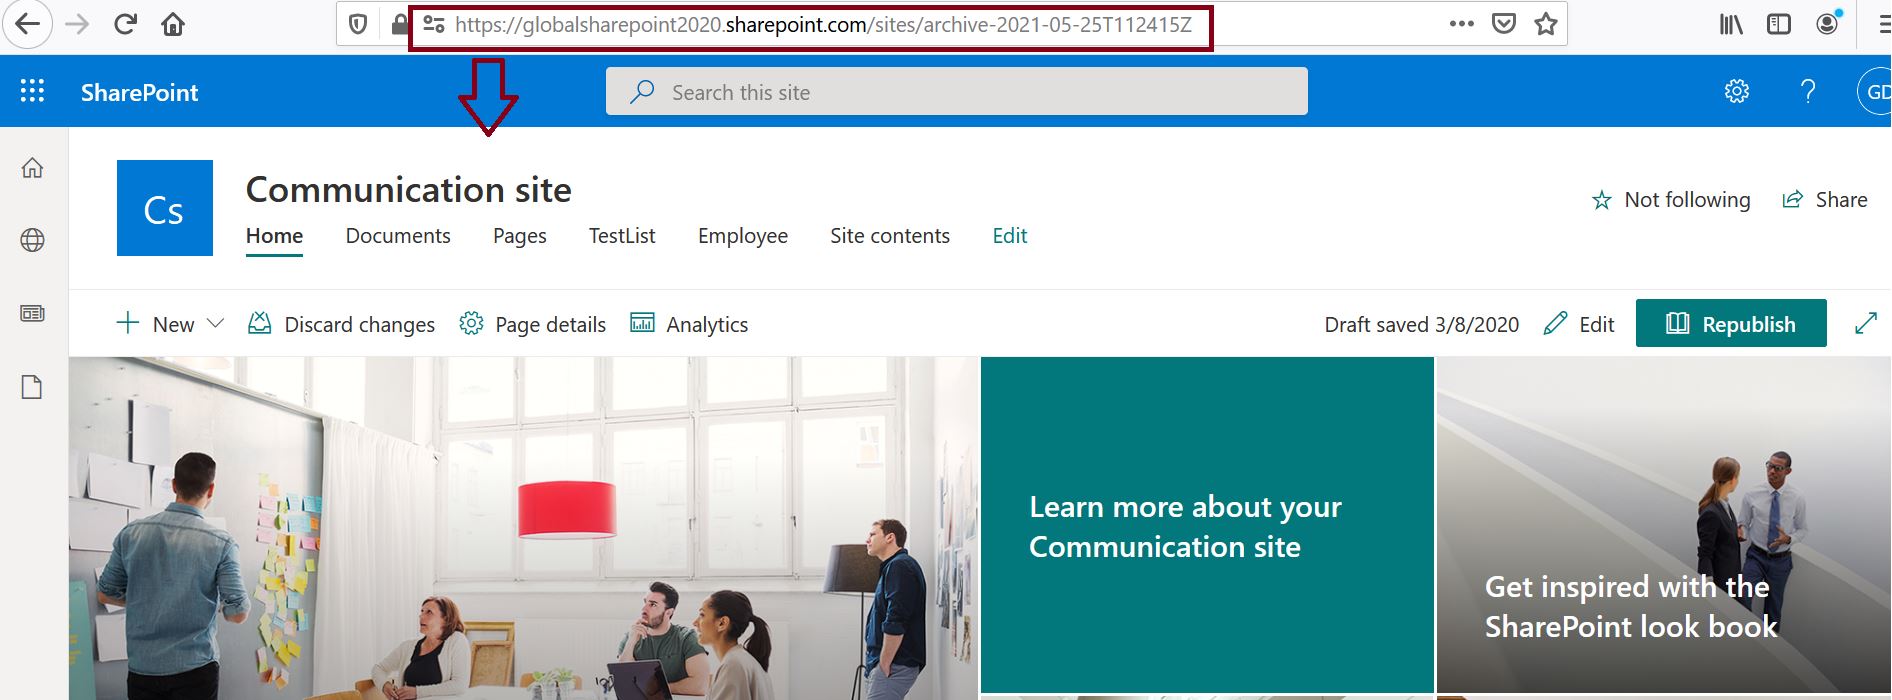 SharePoint Online tenant root site has been archived after swapping